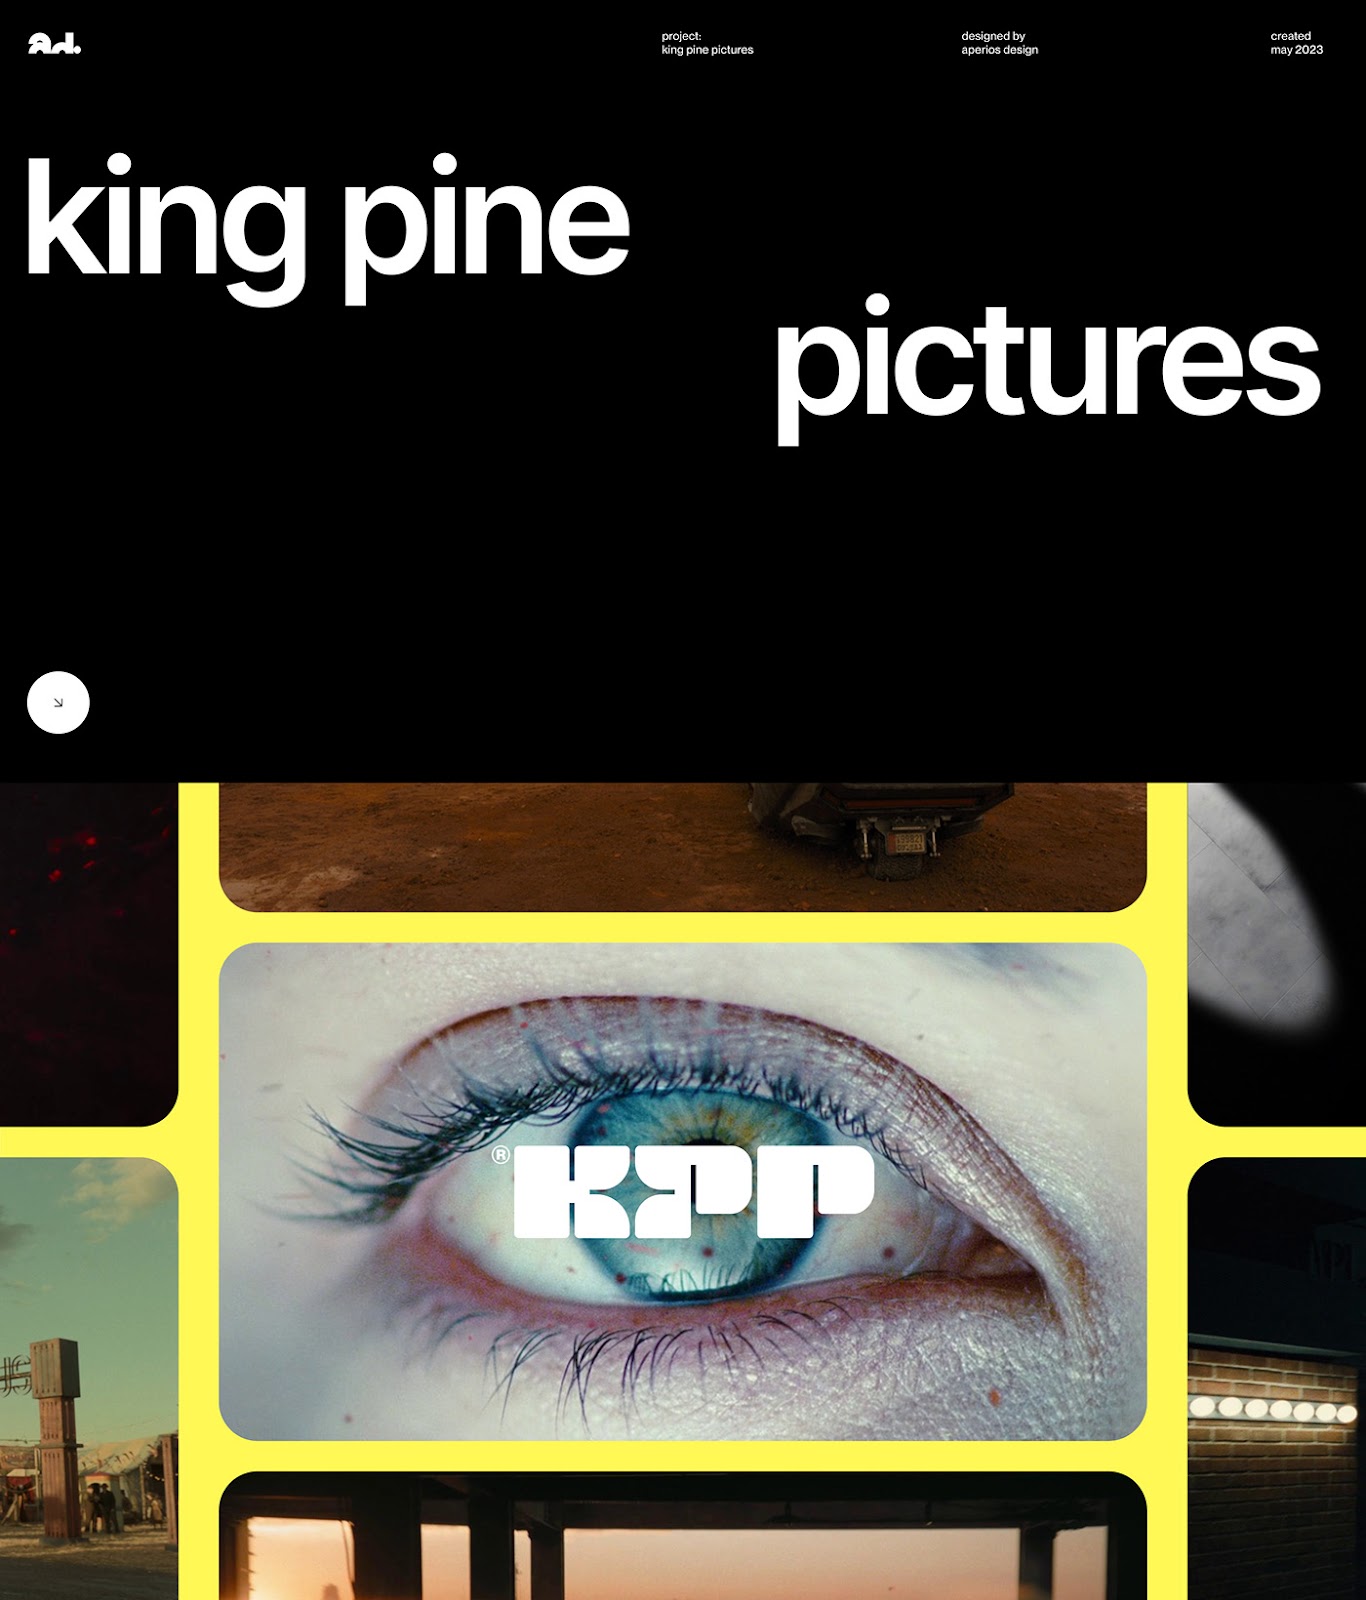 Artifact from the Redefining King Pine Pictures’ New Branding and Visual Identity article on Abduzeedo